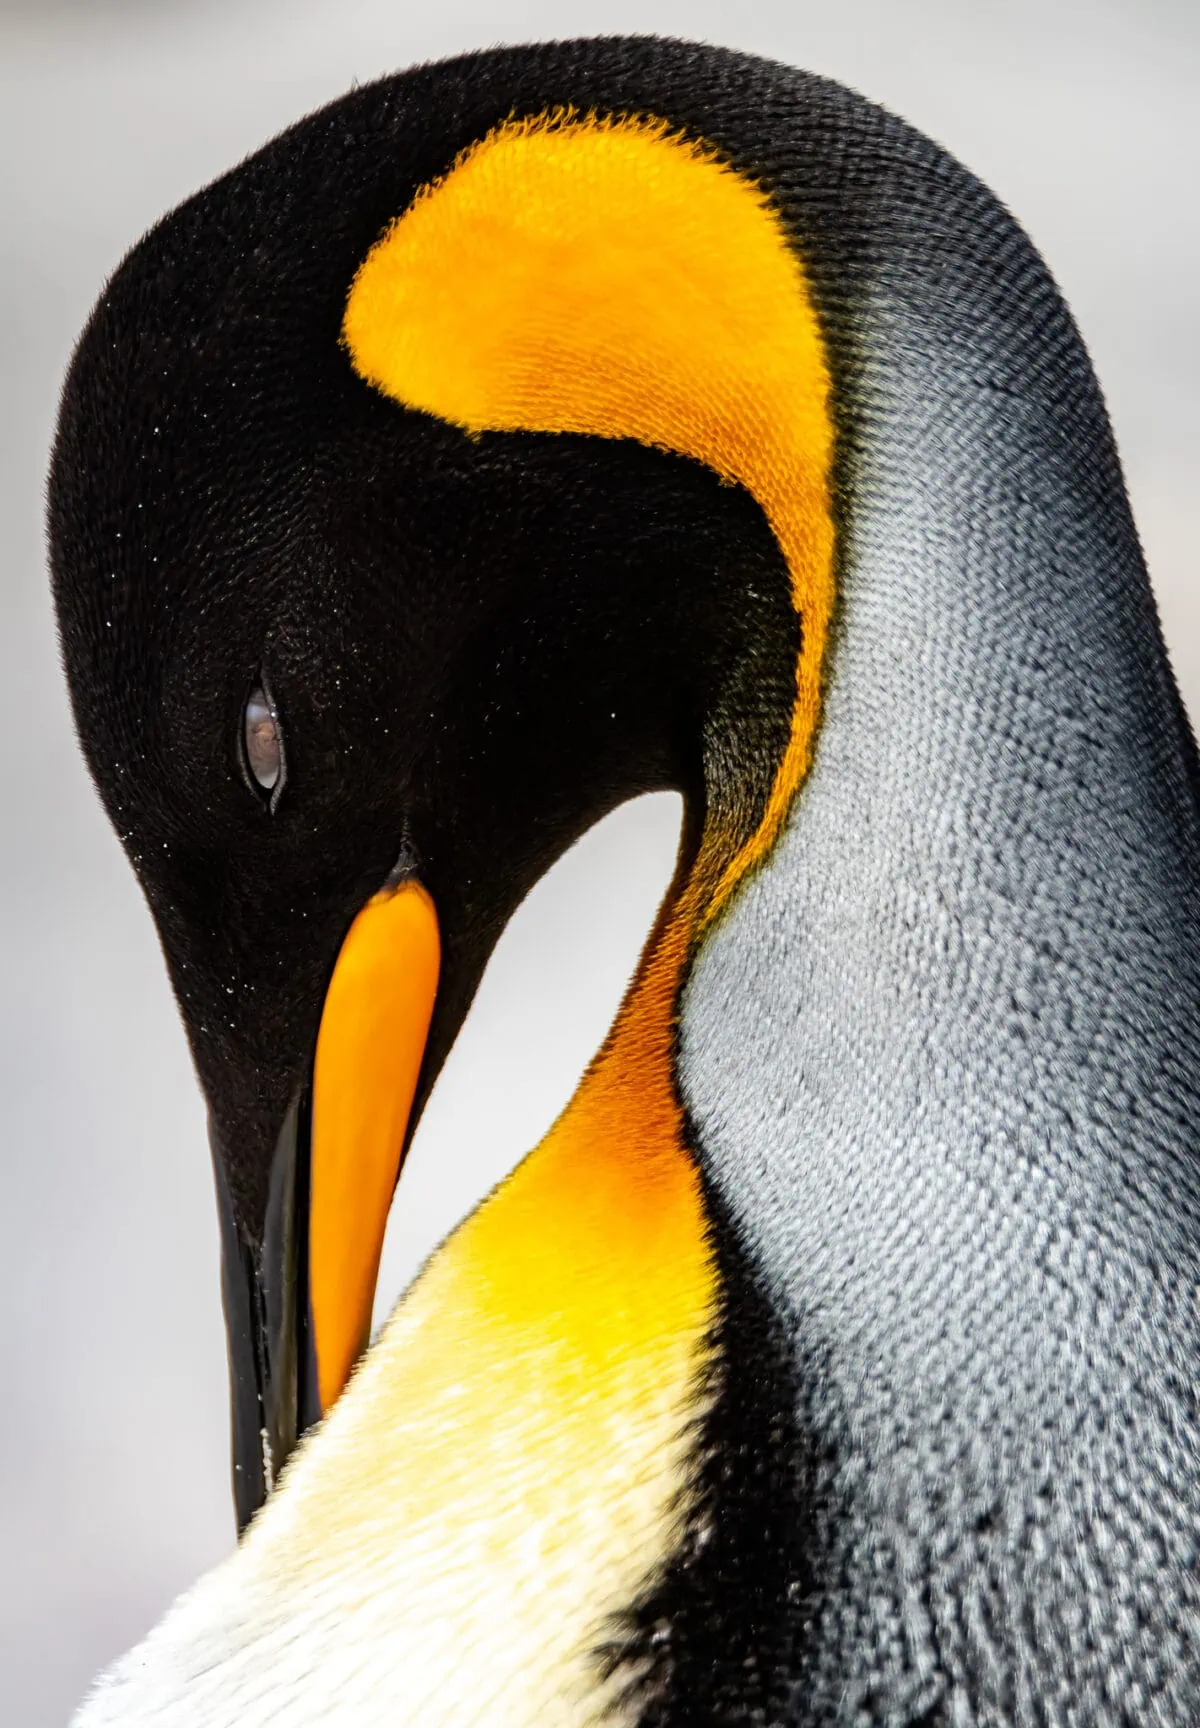 Penguins and Ice and So Much More – My Favorite Antarctica Cruise Photos